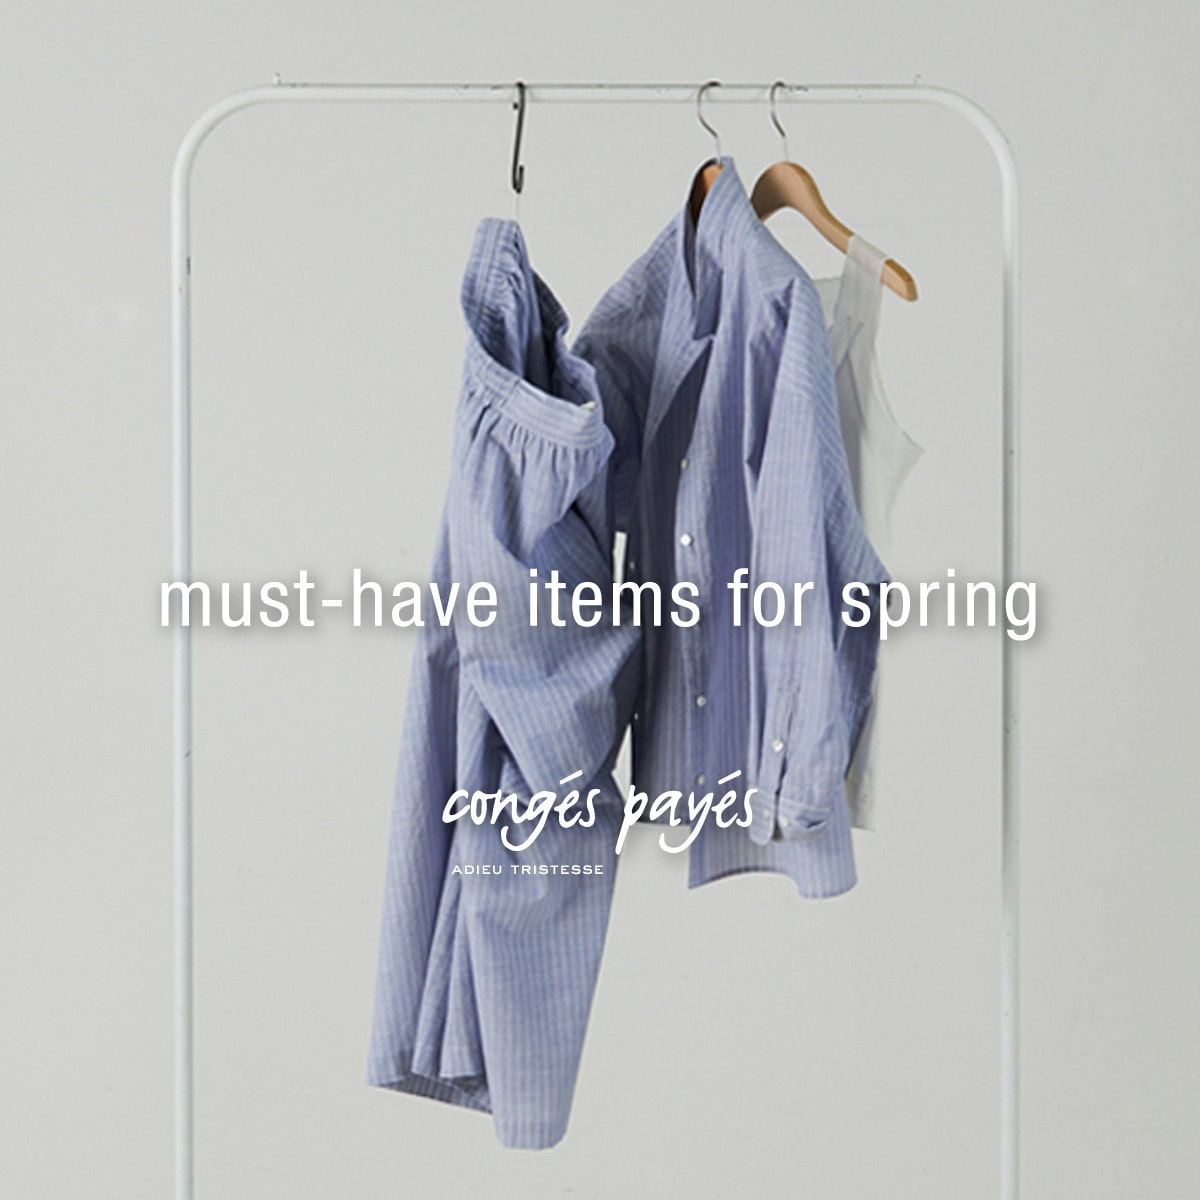 must-have items for spring